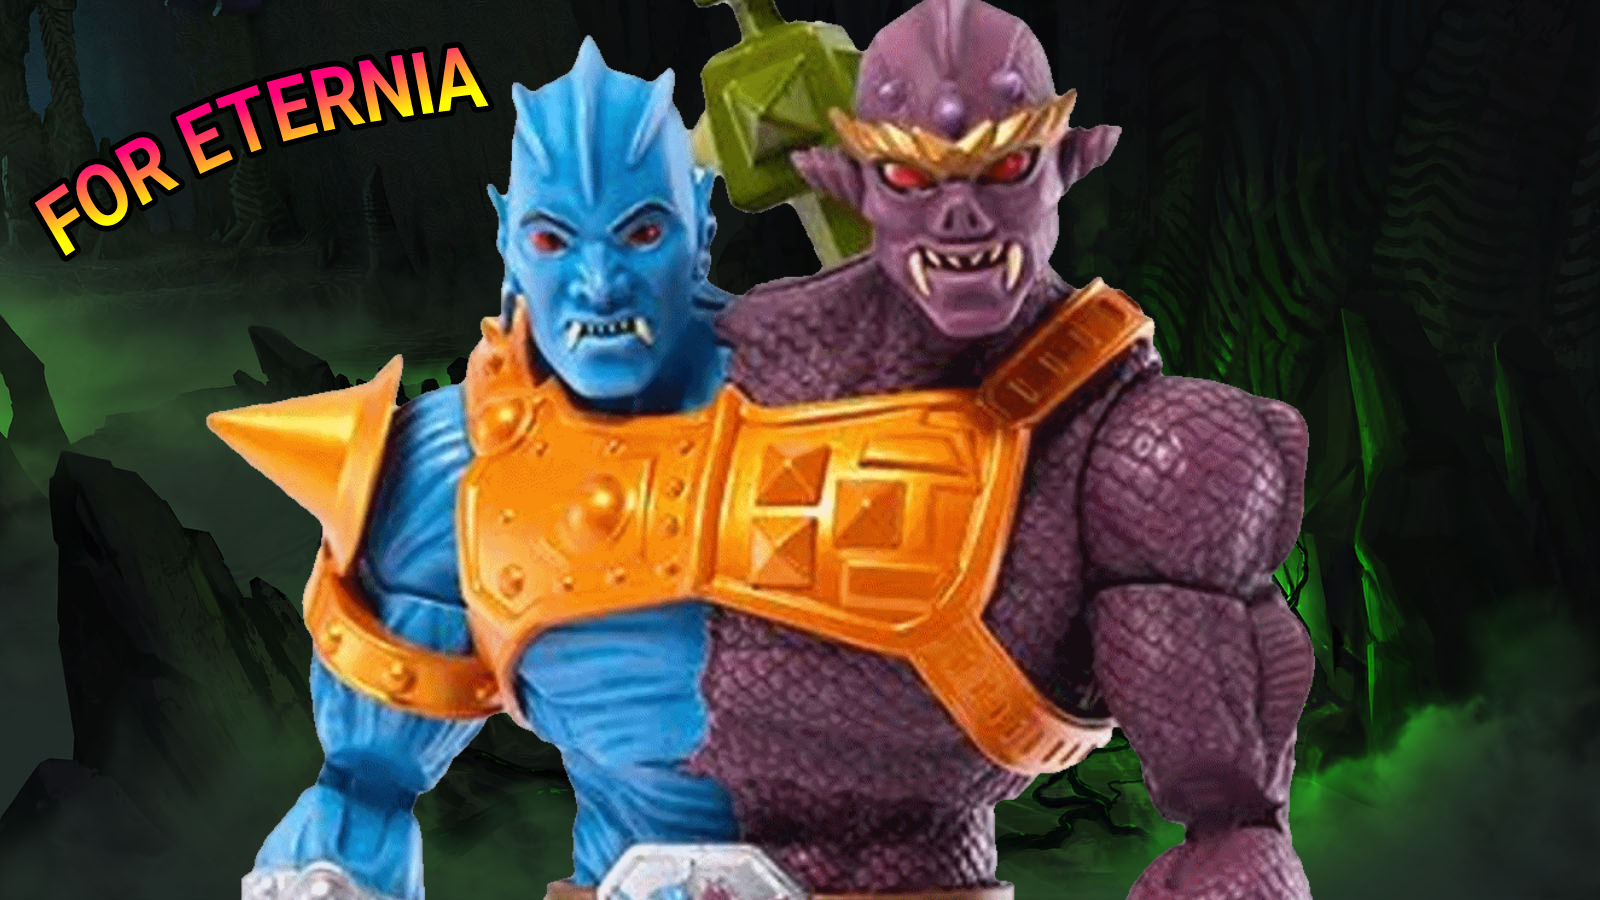 Two Bad is coming to the Masterverse Action Figure Line